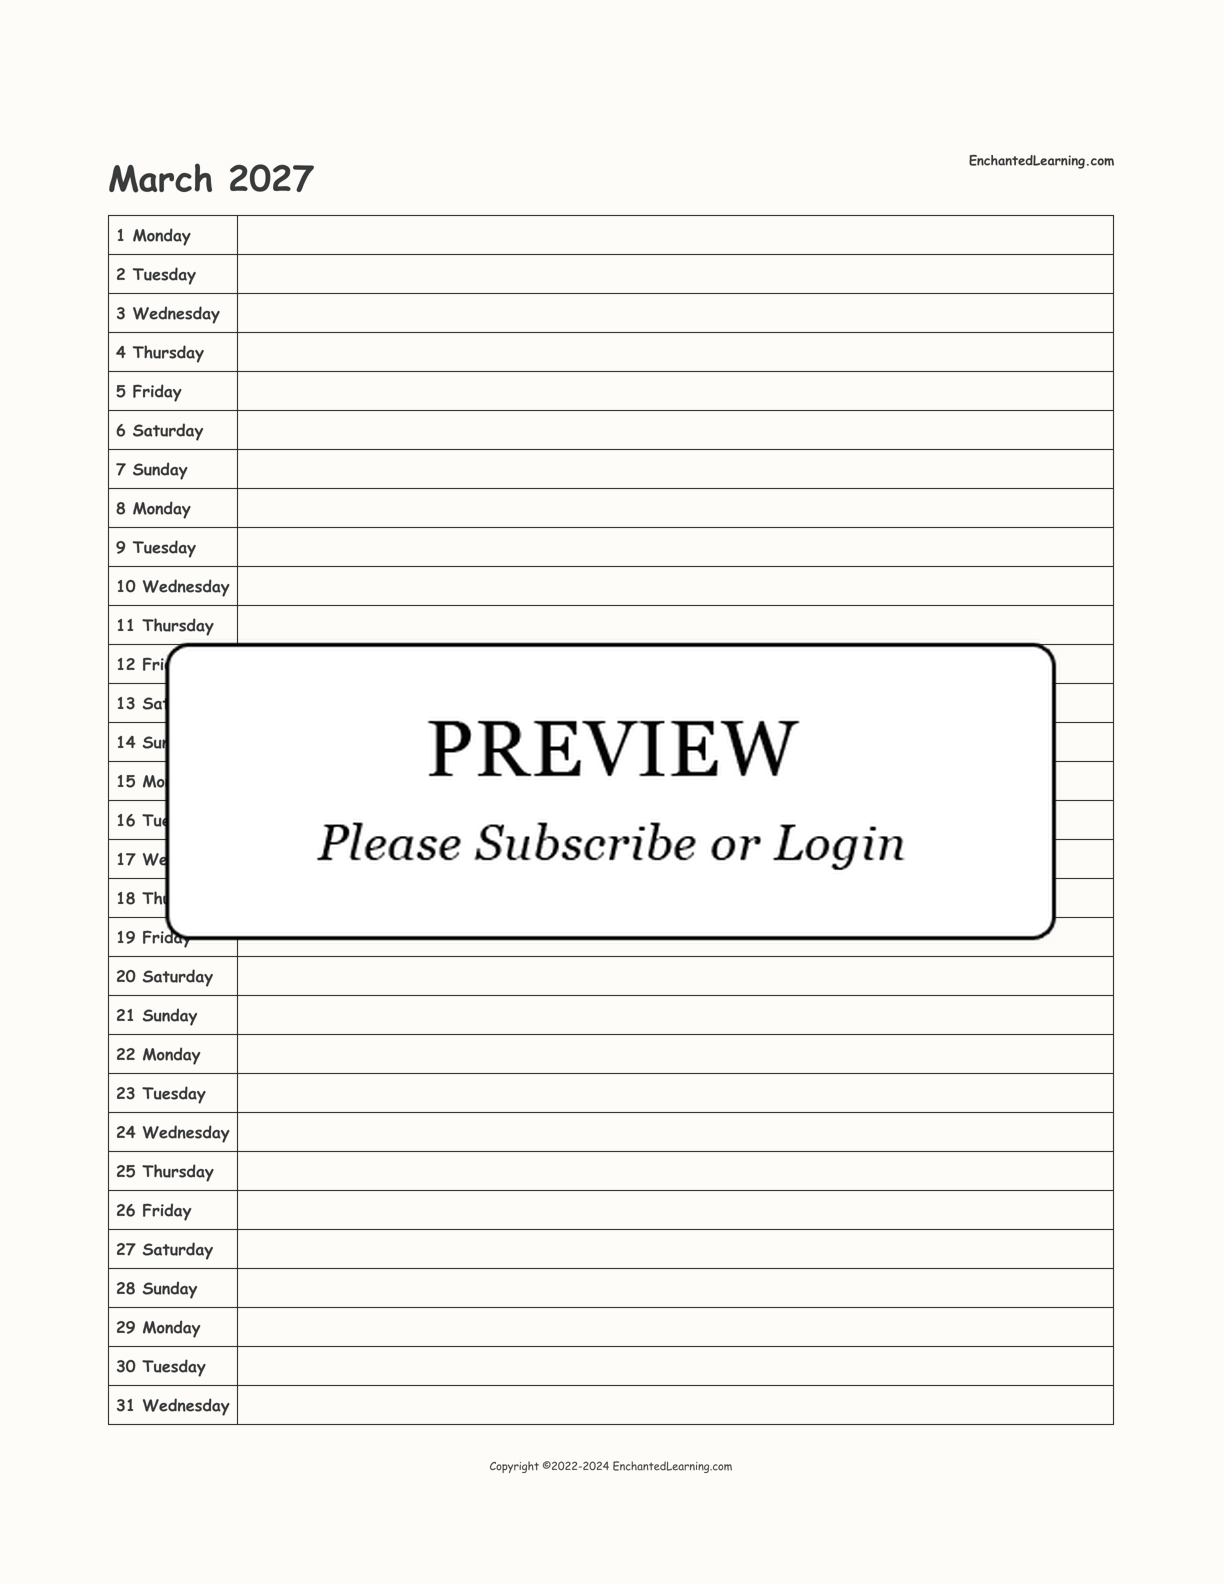 2027 Scheduling Calendar interactive printout page 3